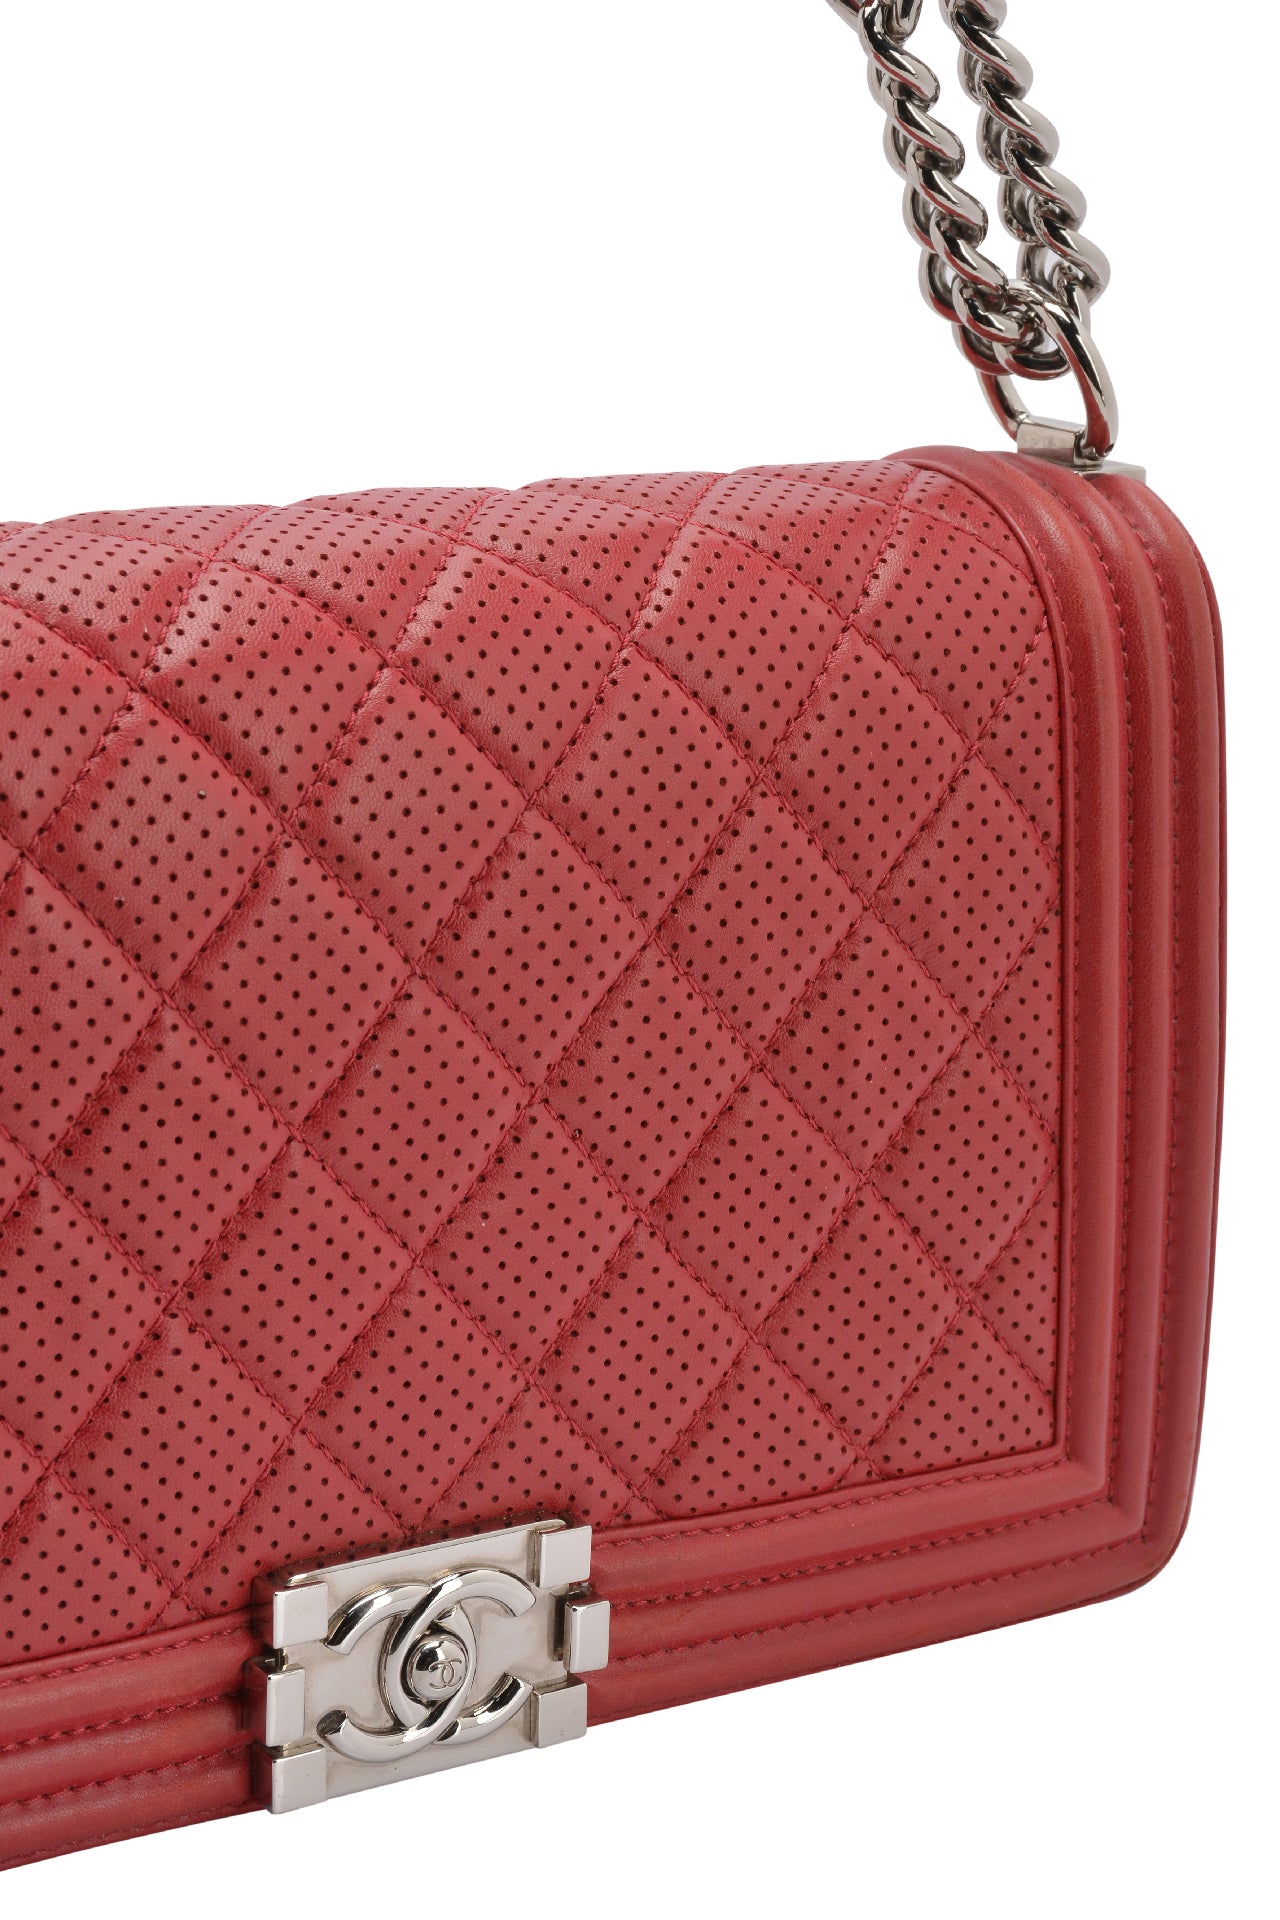 Chanel Perforated Red Large Boy Bag